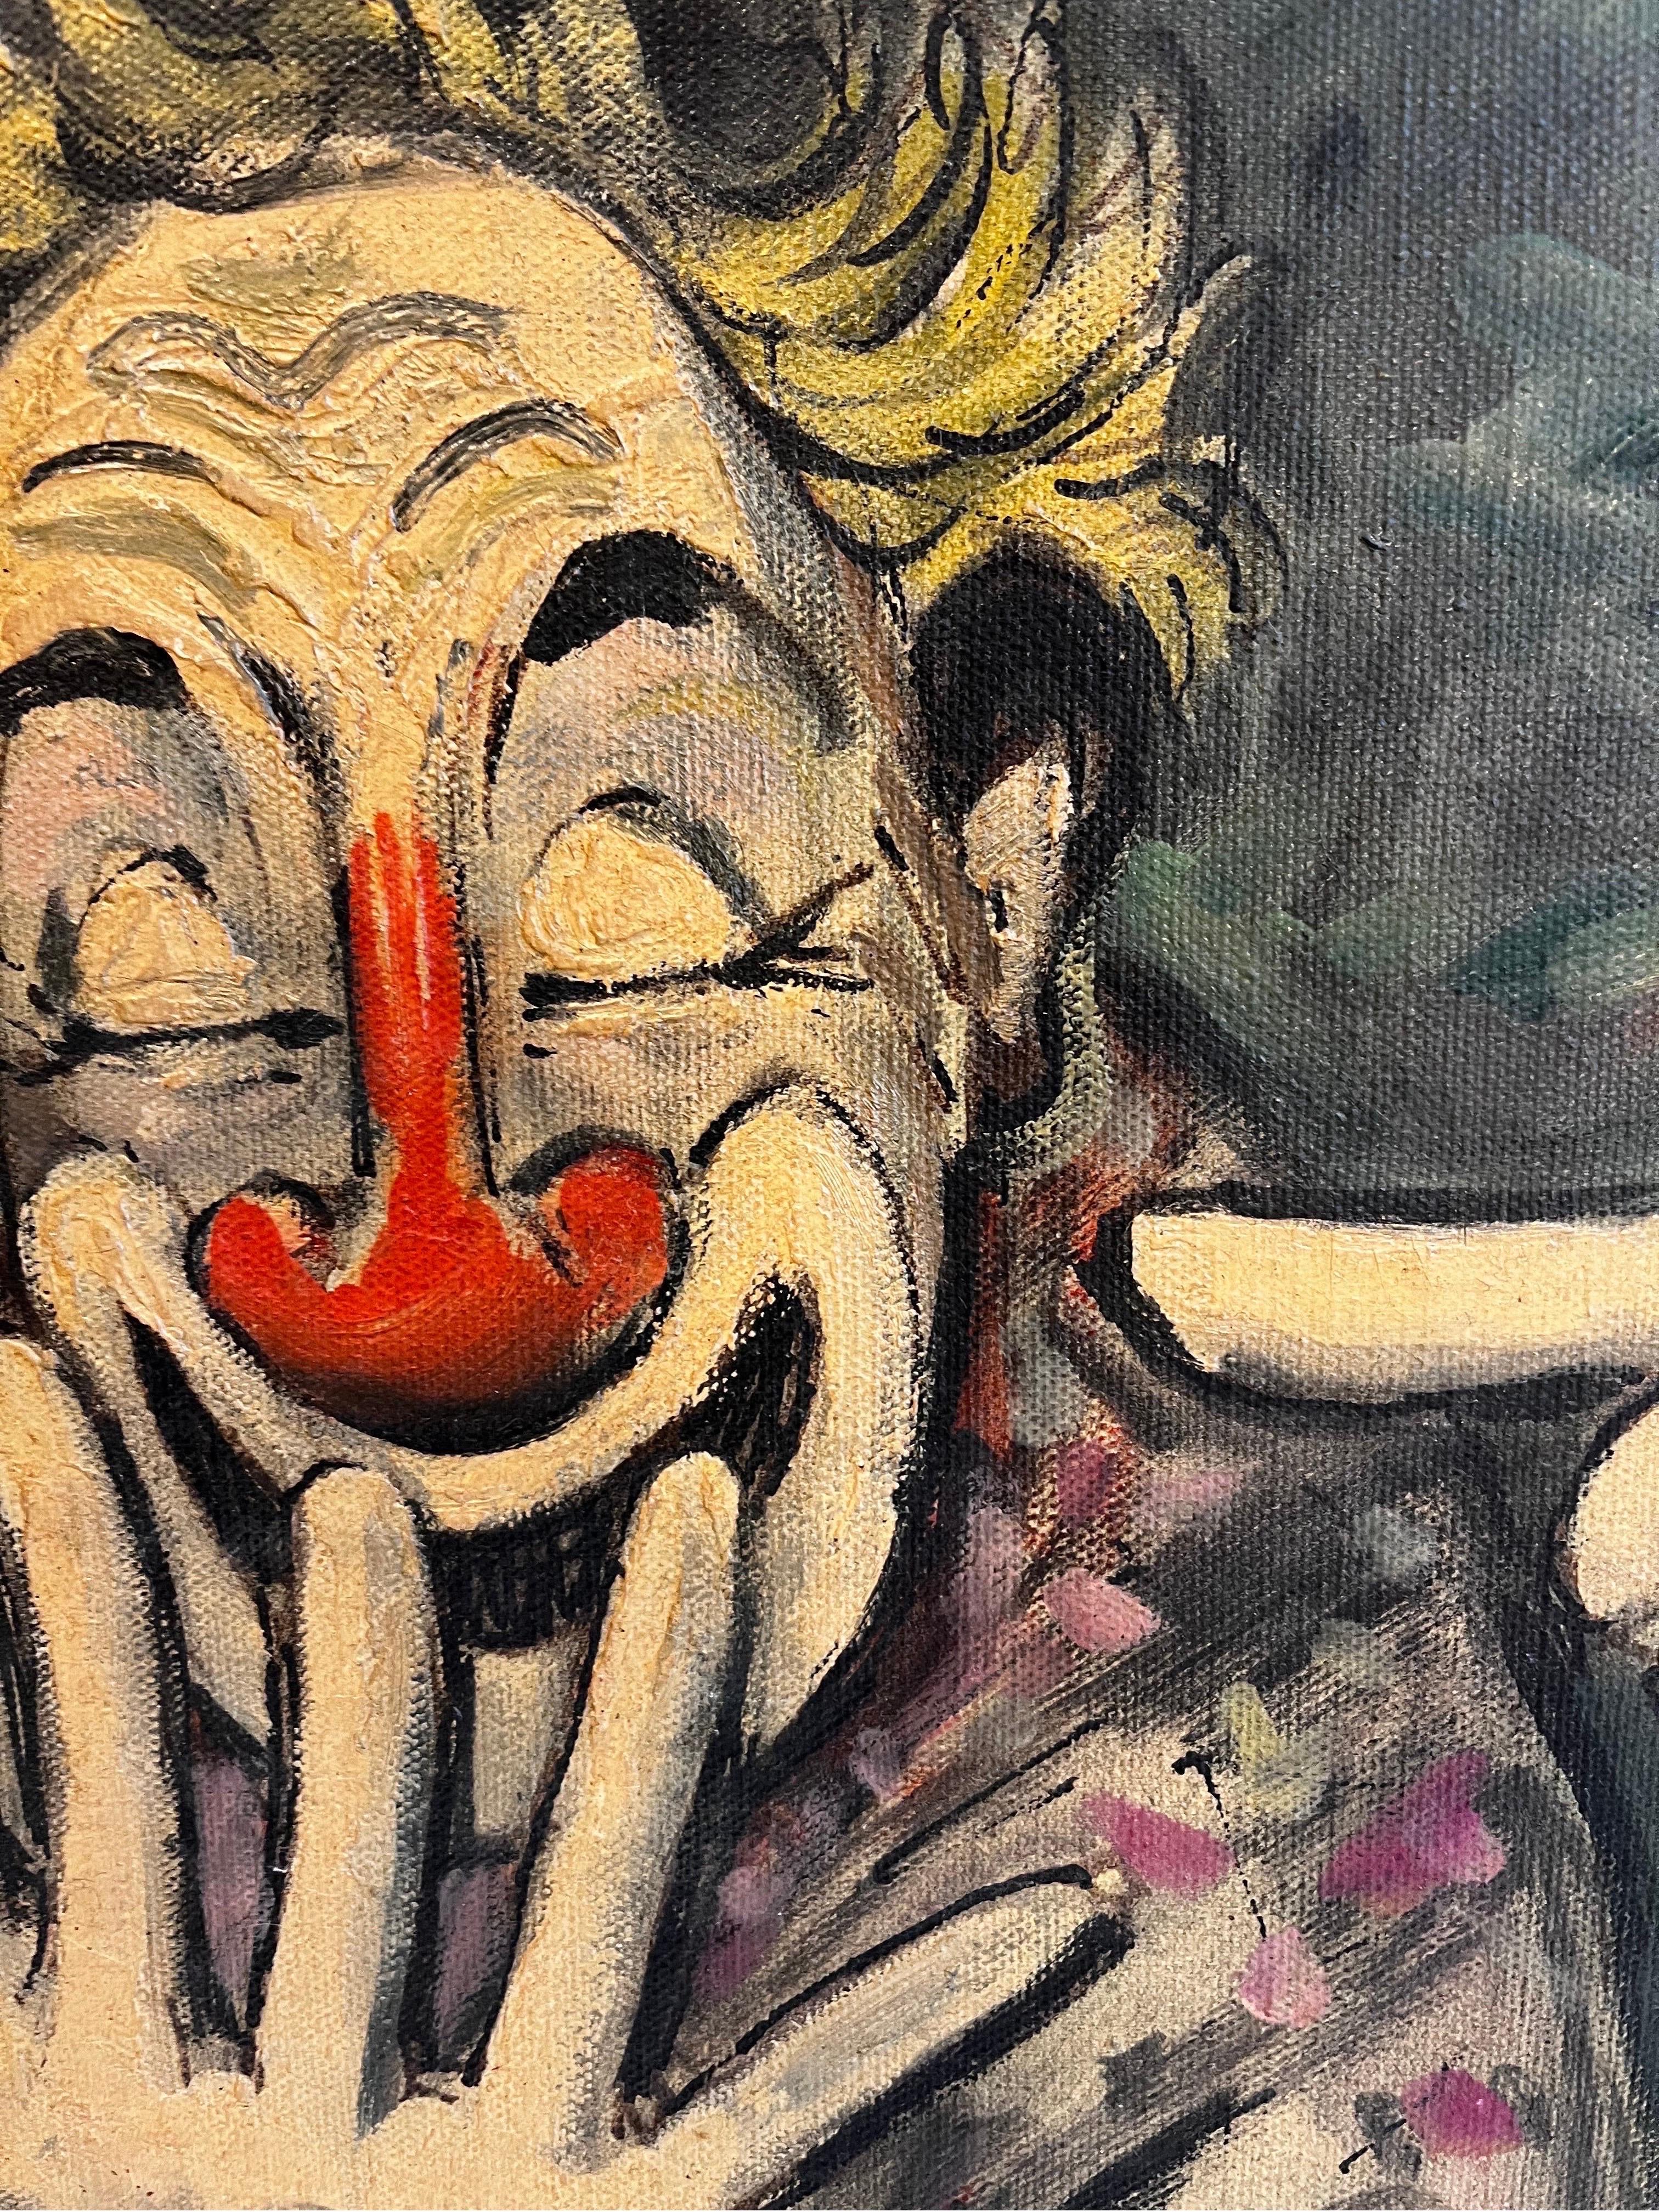 clown oil painting signed